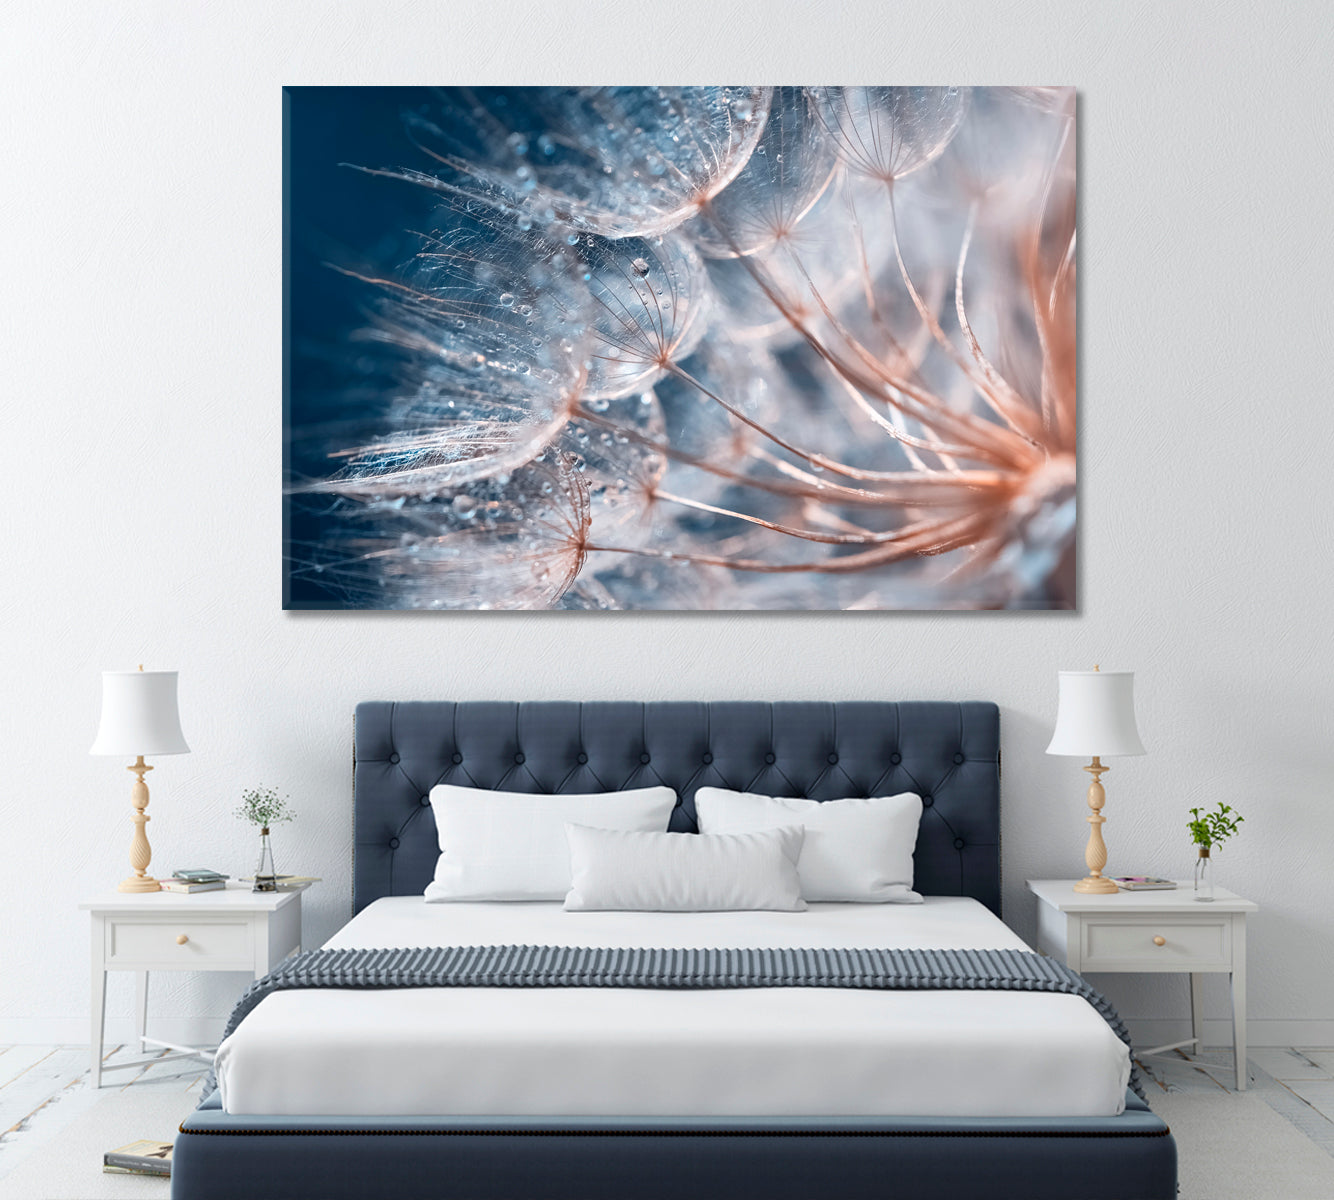 Dandelion with Water Drops Canvas Print ArtLexy 1 Panel 24"x16" inches 